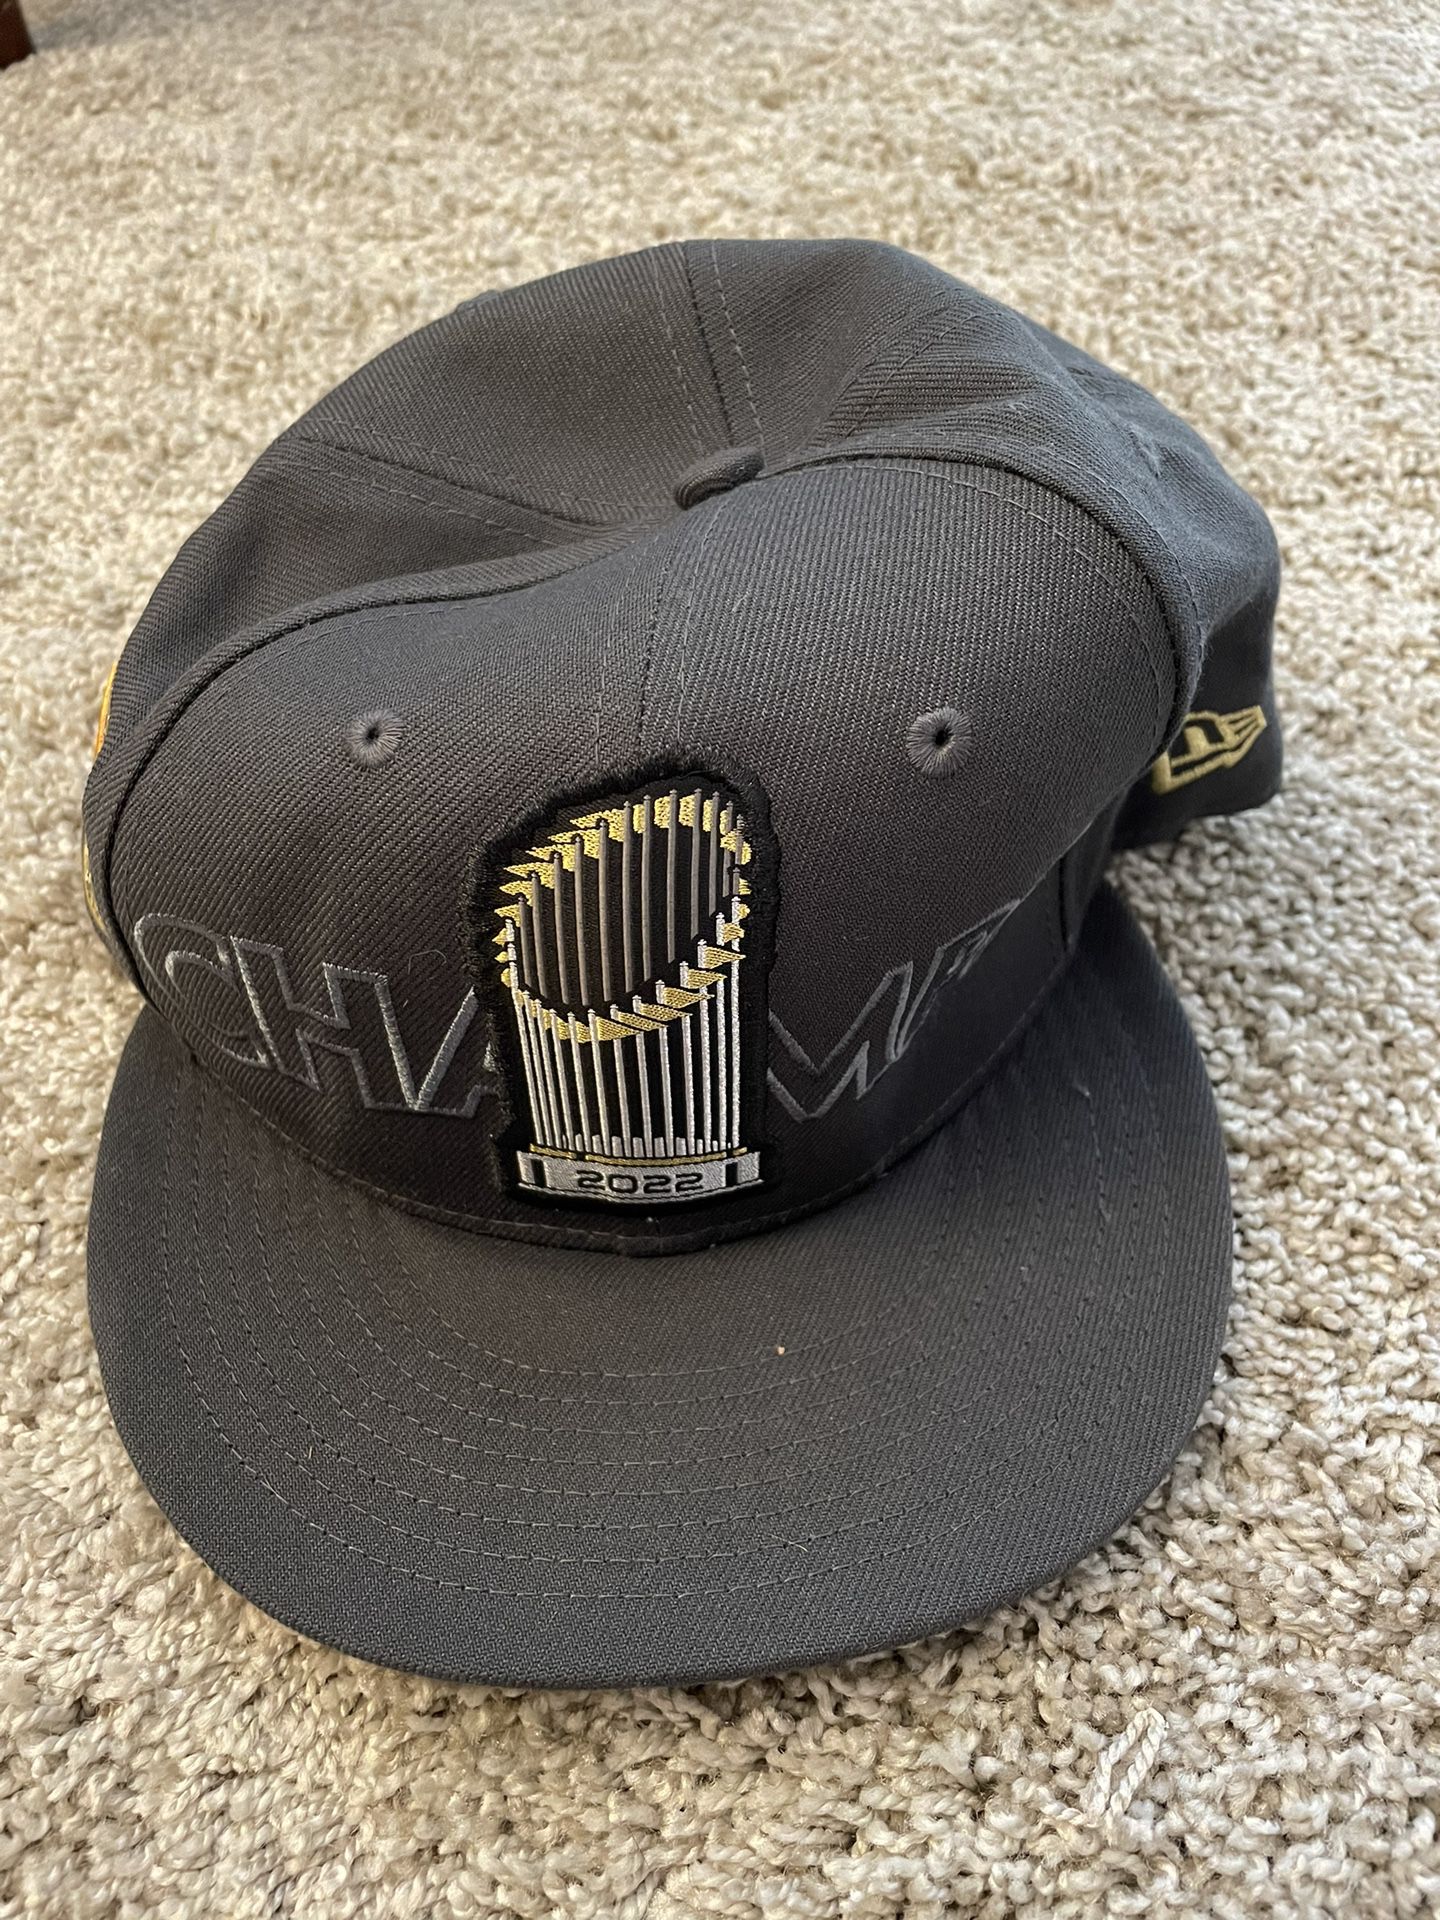 Astros 2022 World Series Championship Hat for Sale in Houston, TX - OfferUp